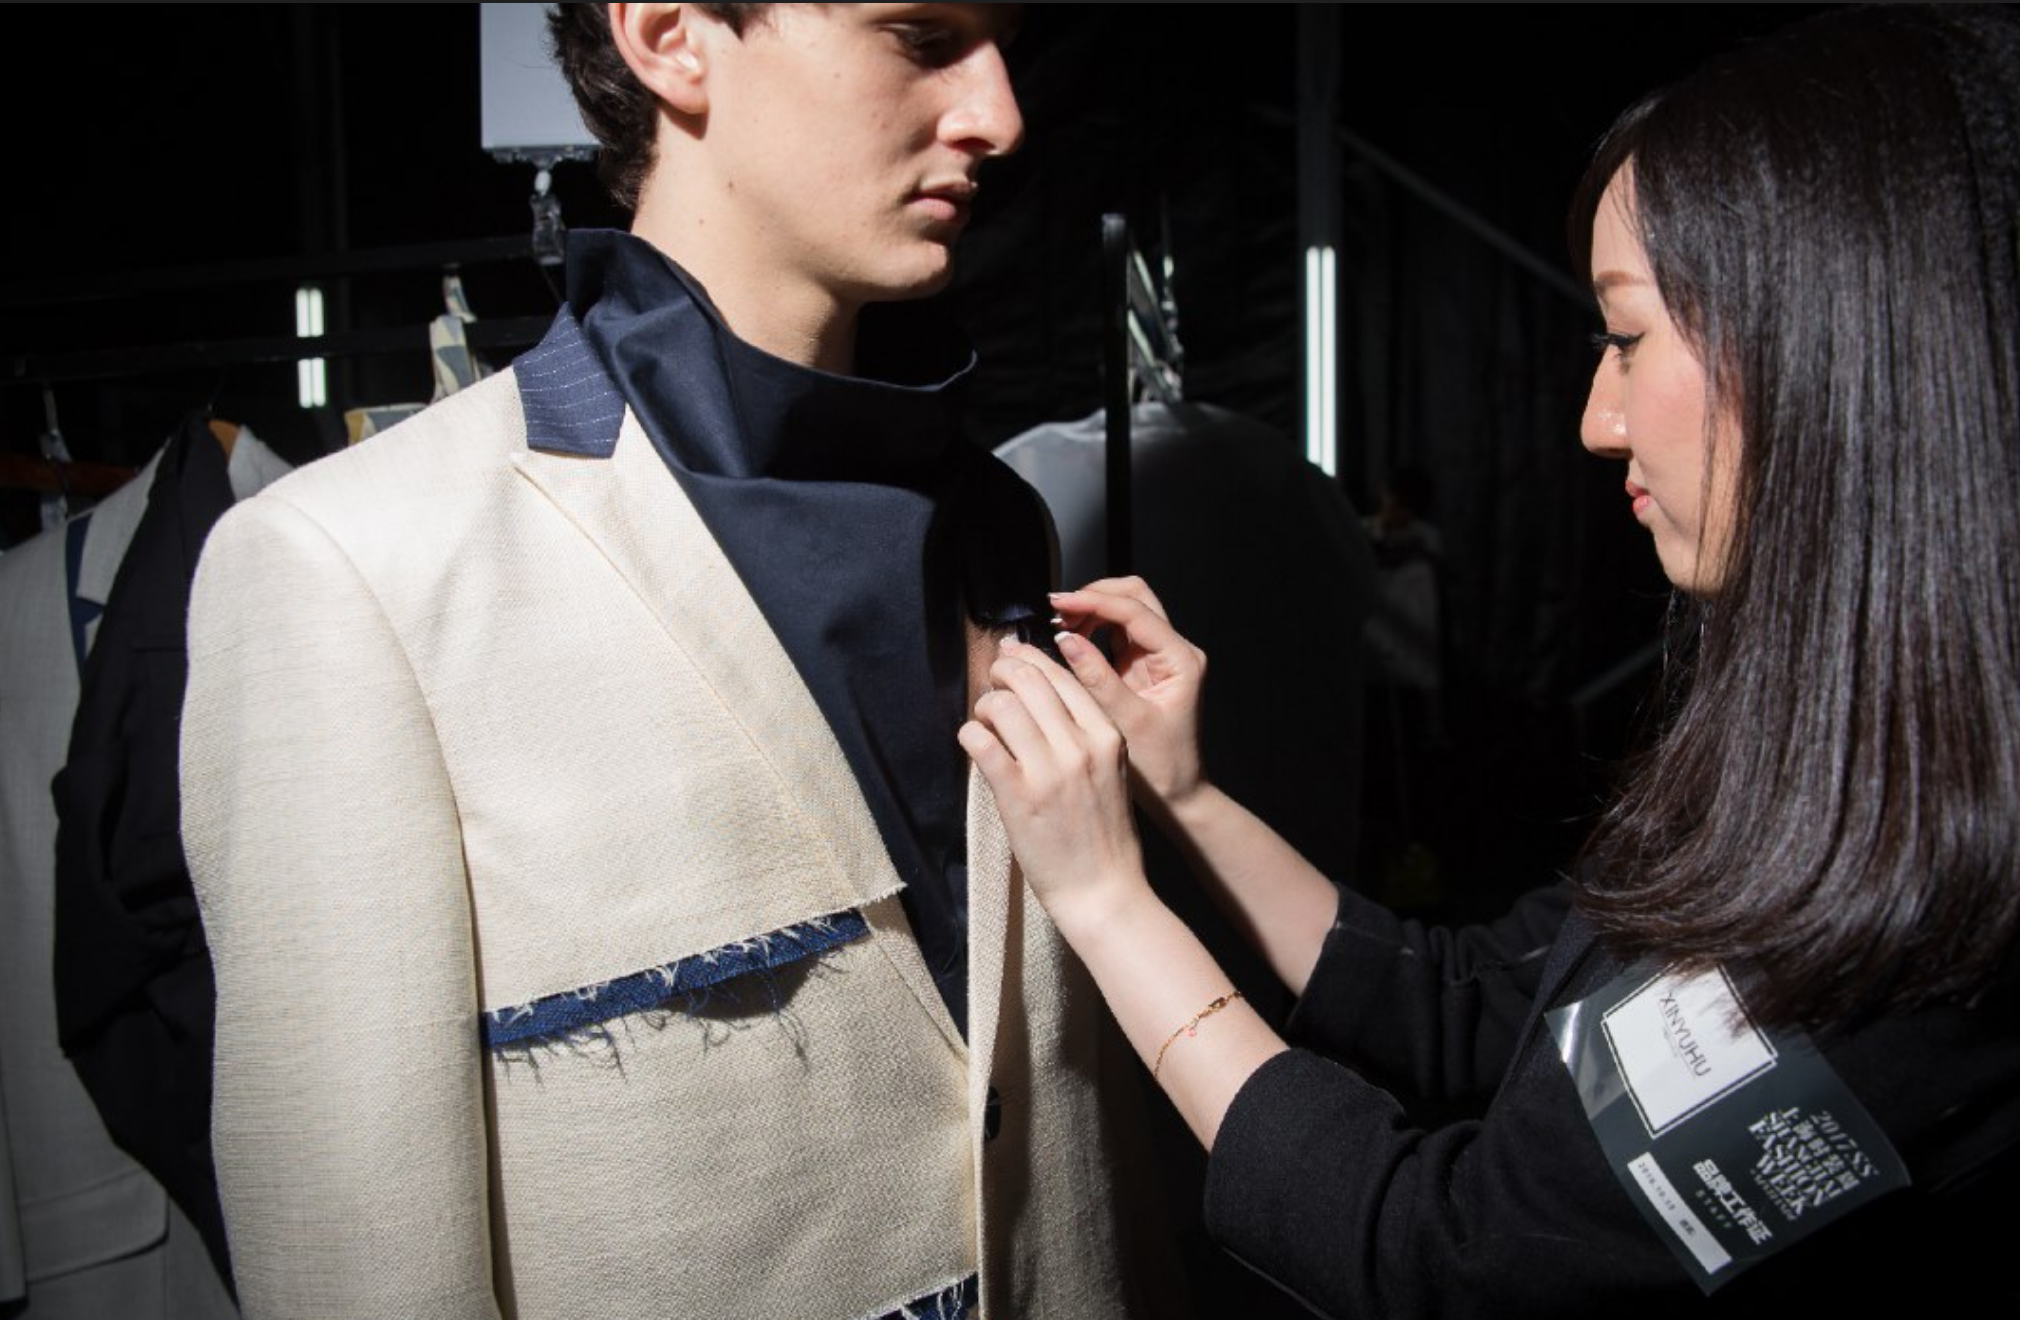 Italian wool maker Reda worked with Chinese designer Hu Xinyu for a capsule collecetion last season targeting the Chinese market. (Courtesy Photo)